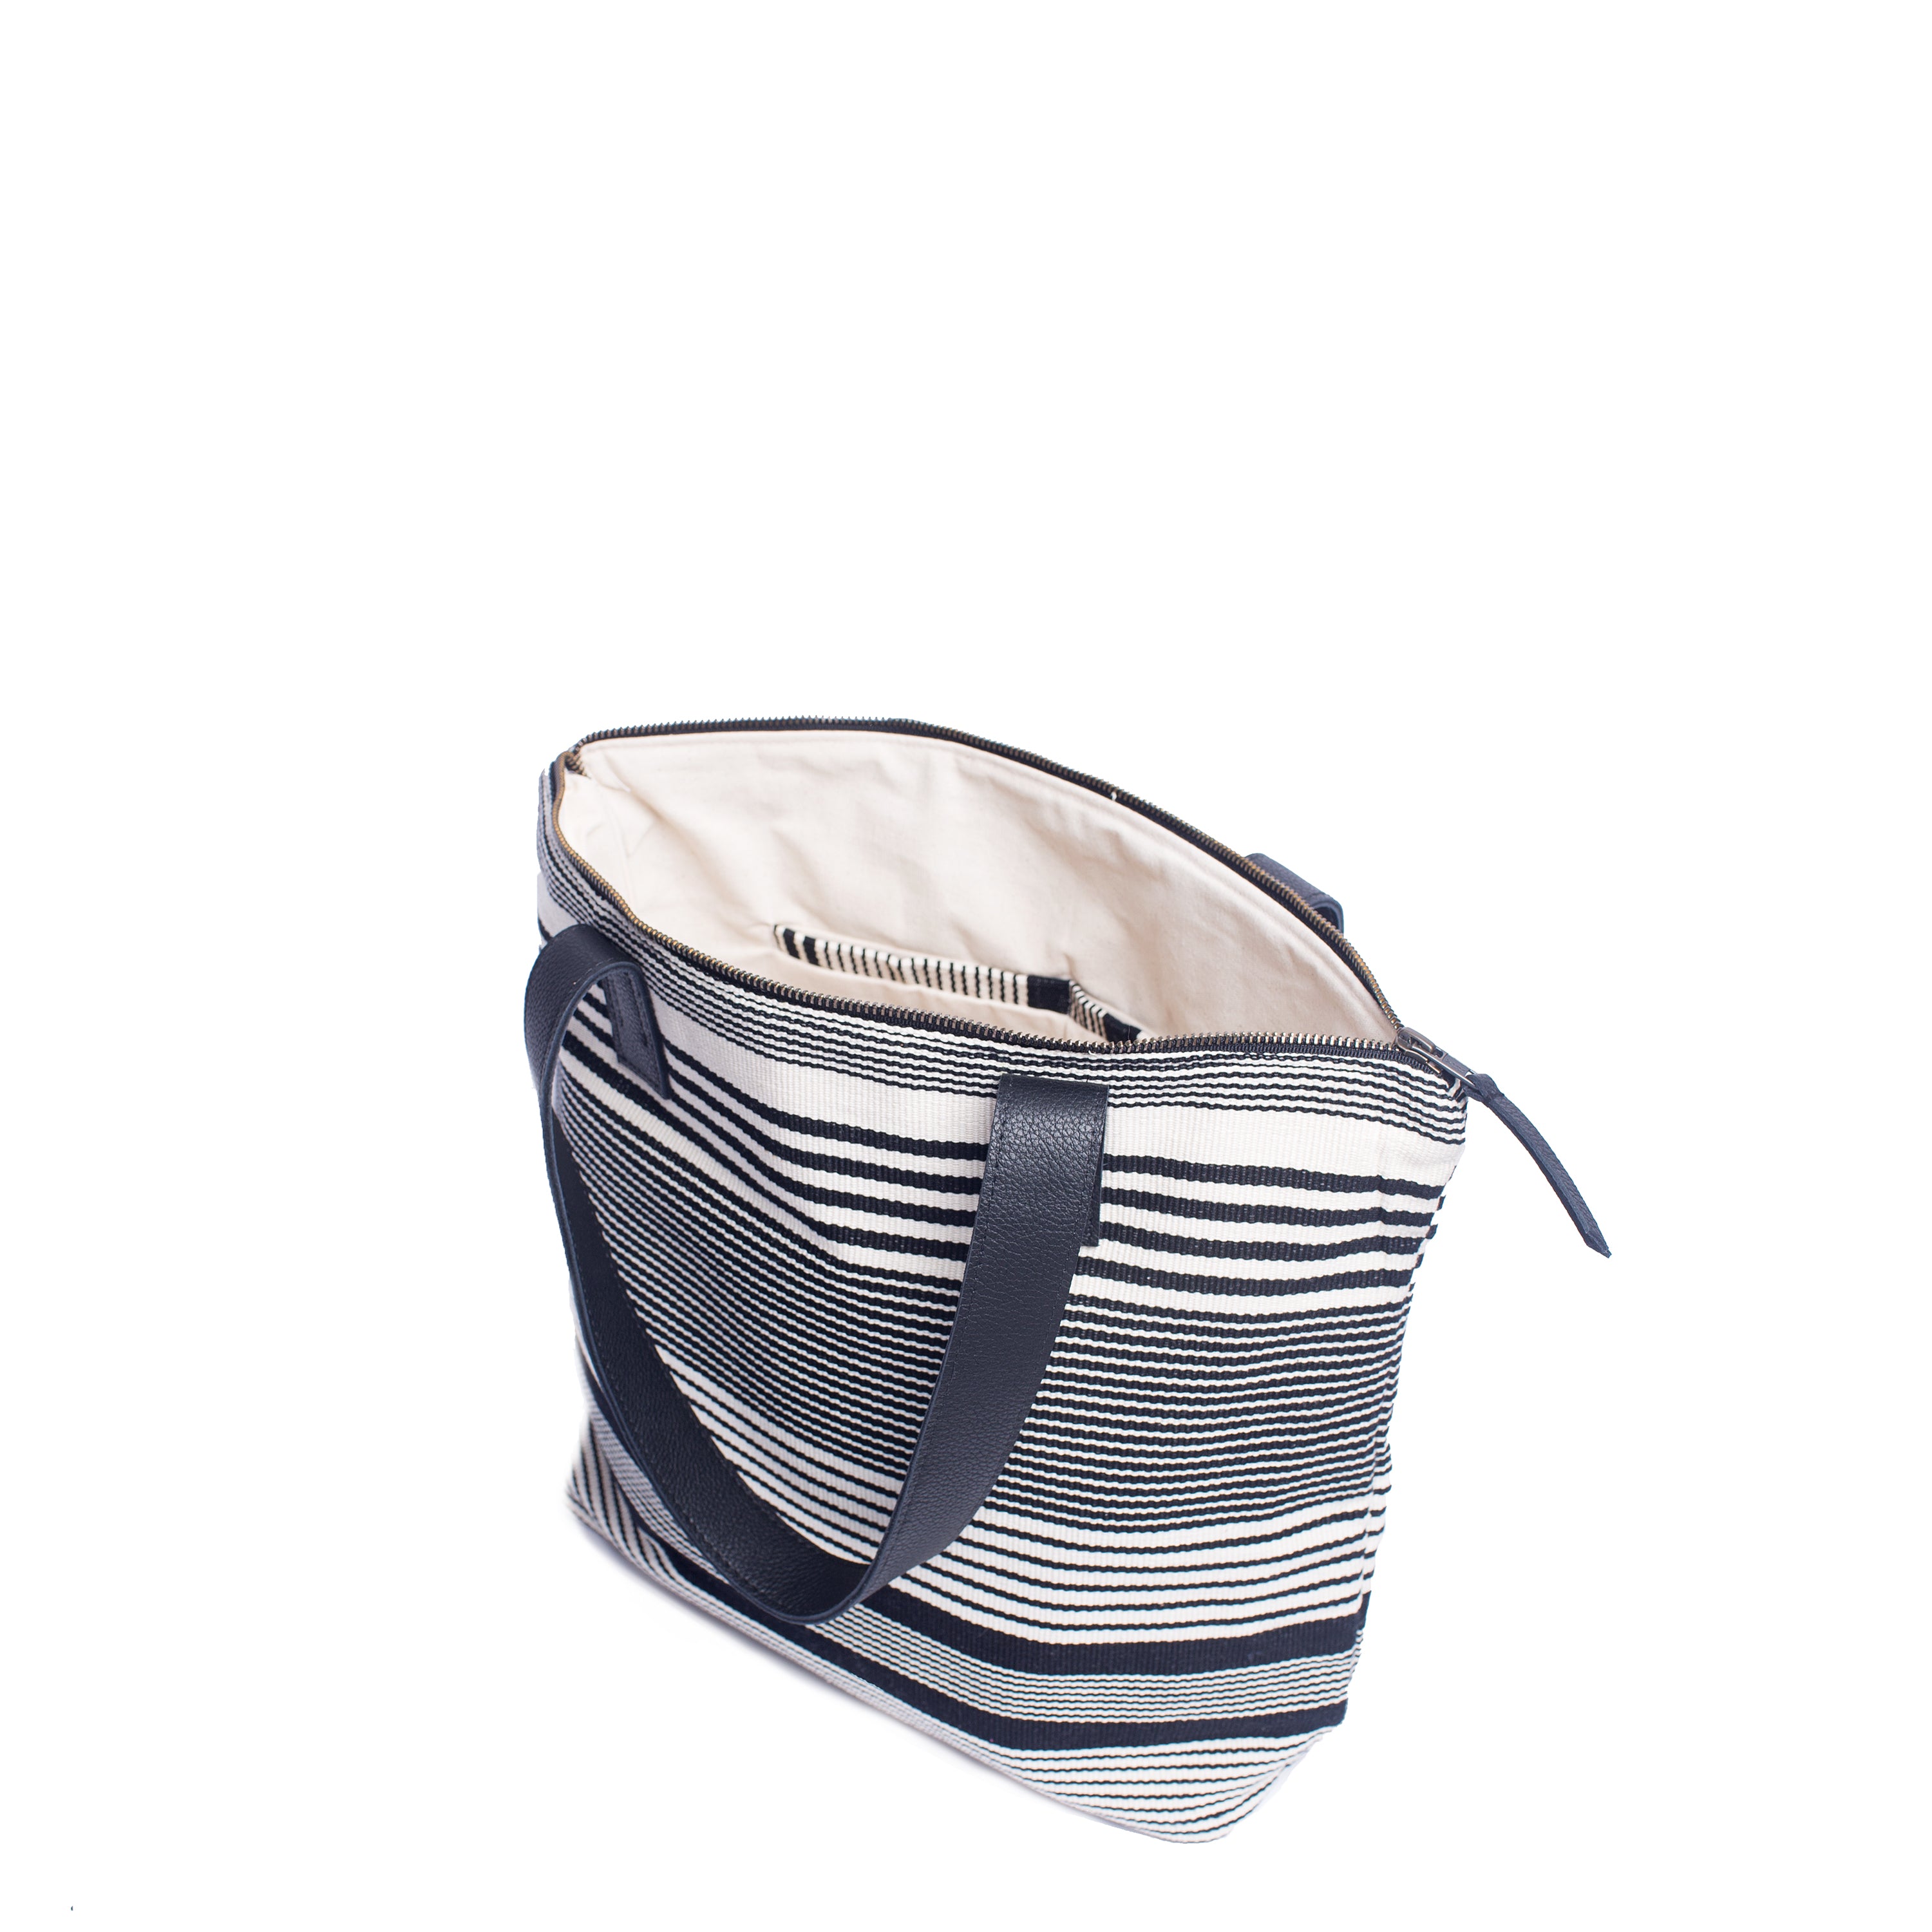 The hand woven artisan Angela Tote in Black and White Stripes is unzipped and open. The interior has a white lining.